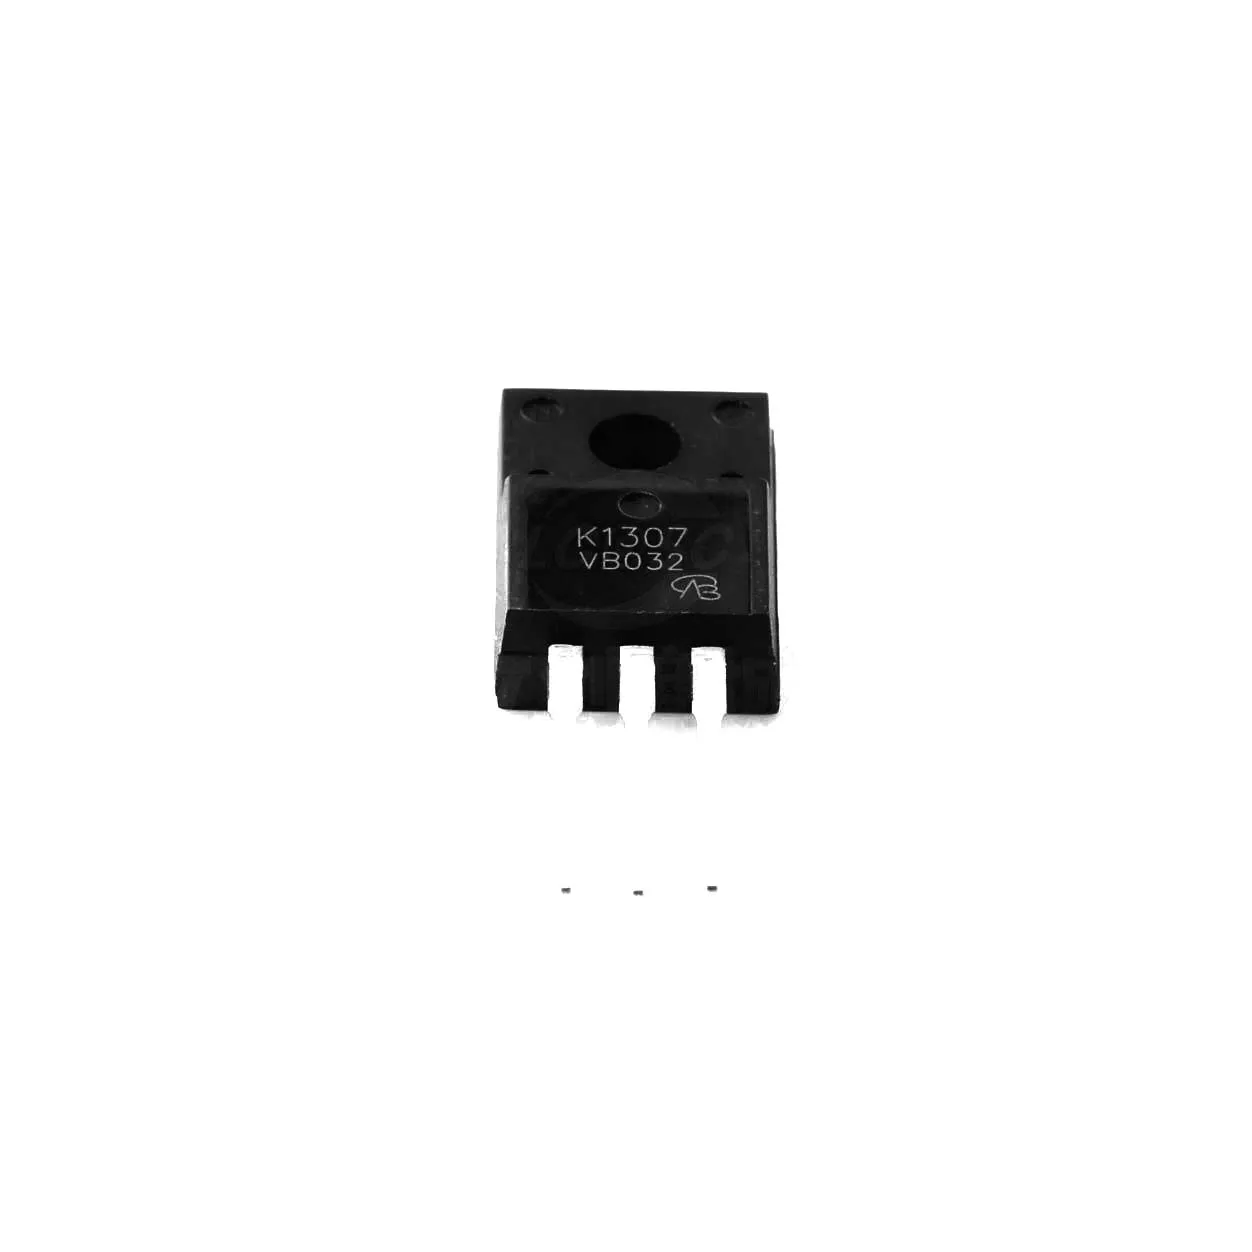 K1307 100V 18A TO-220F MOSFET diode triode The transistor